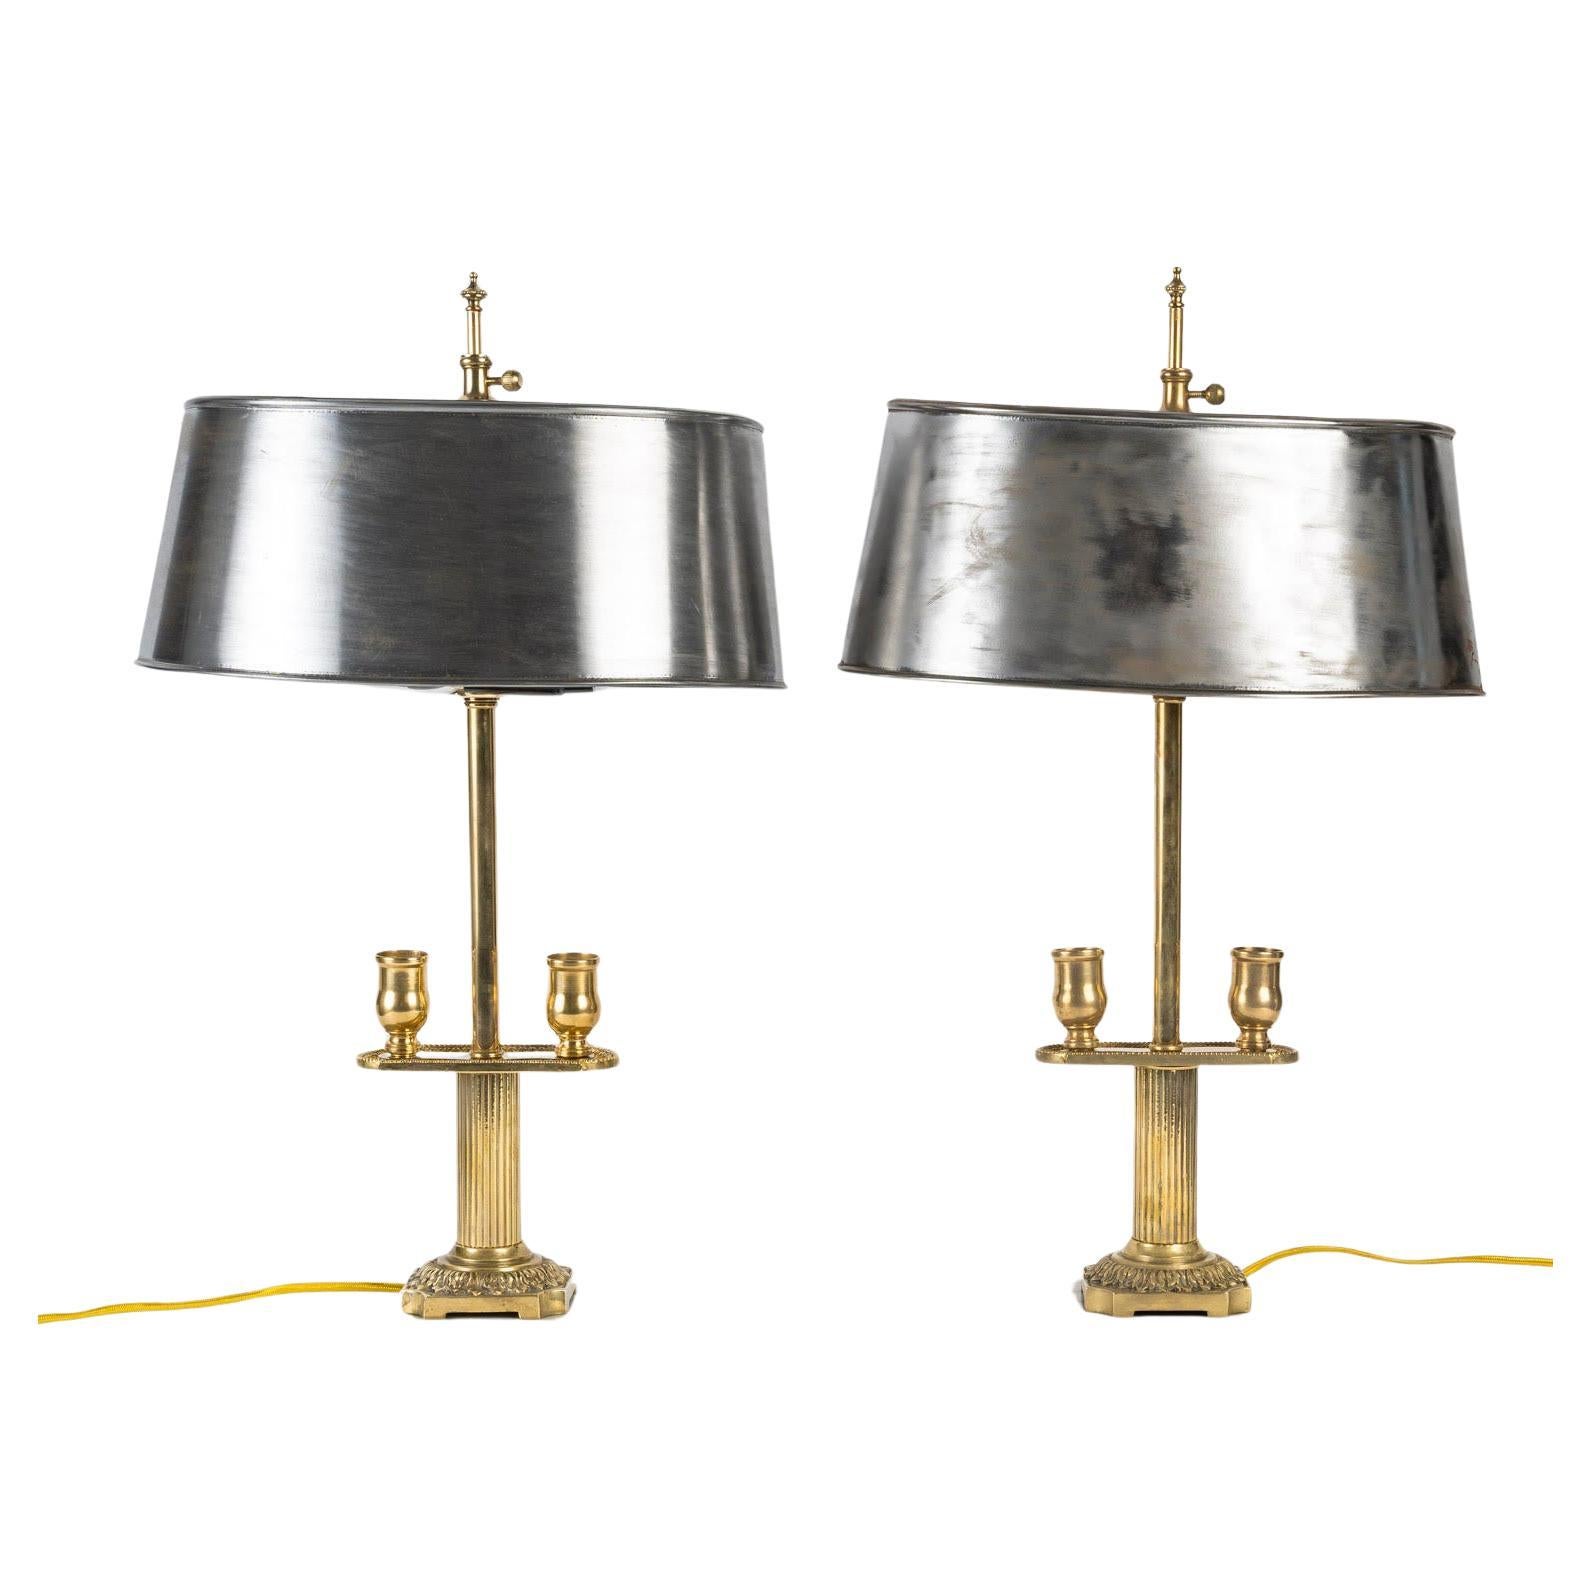 Pair of Candlesticks Mounted as Table Lamps, 19th Century, Napoleon III Period.